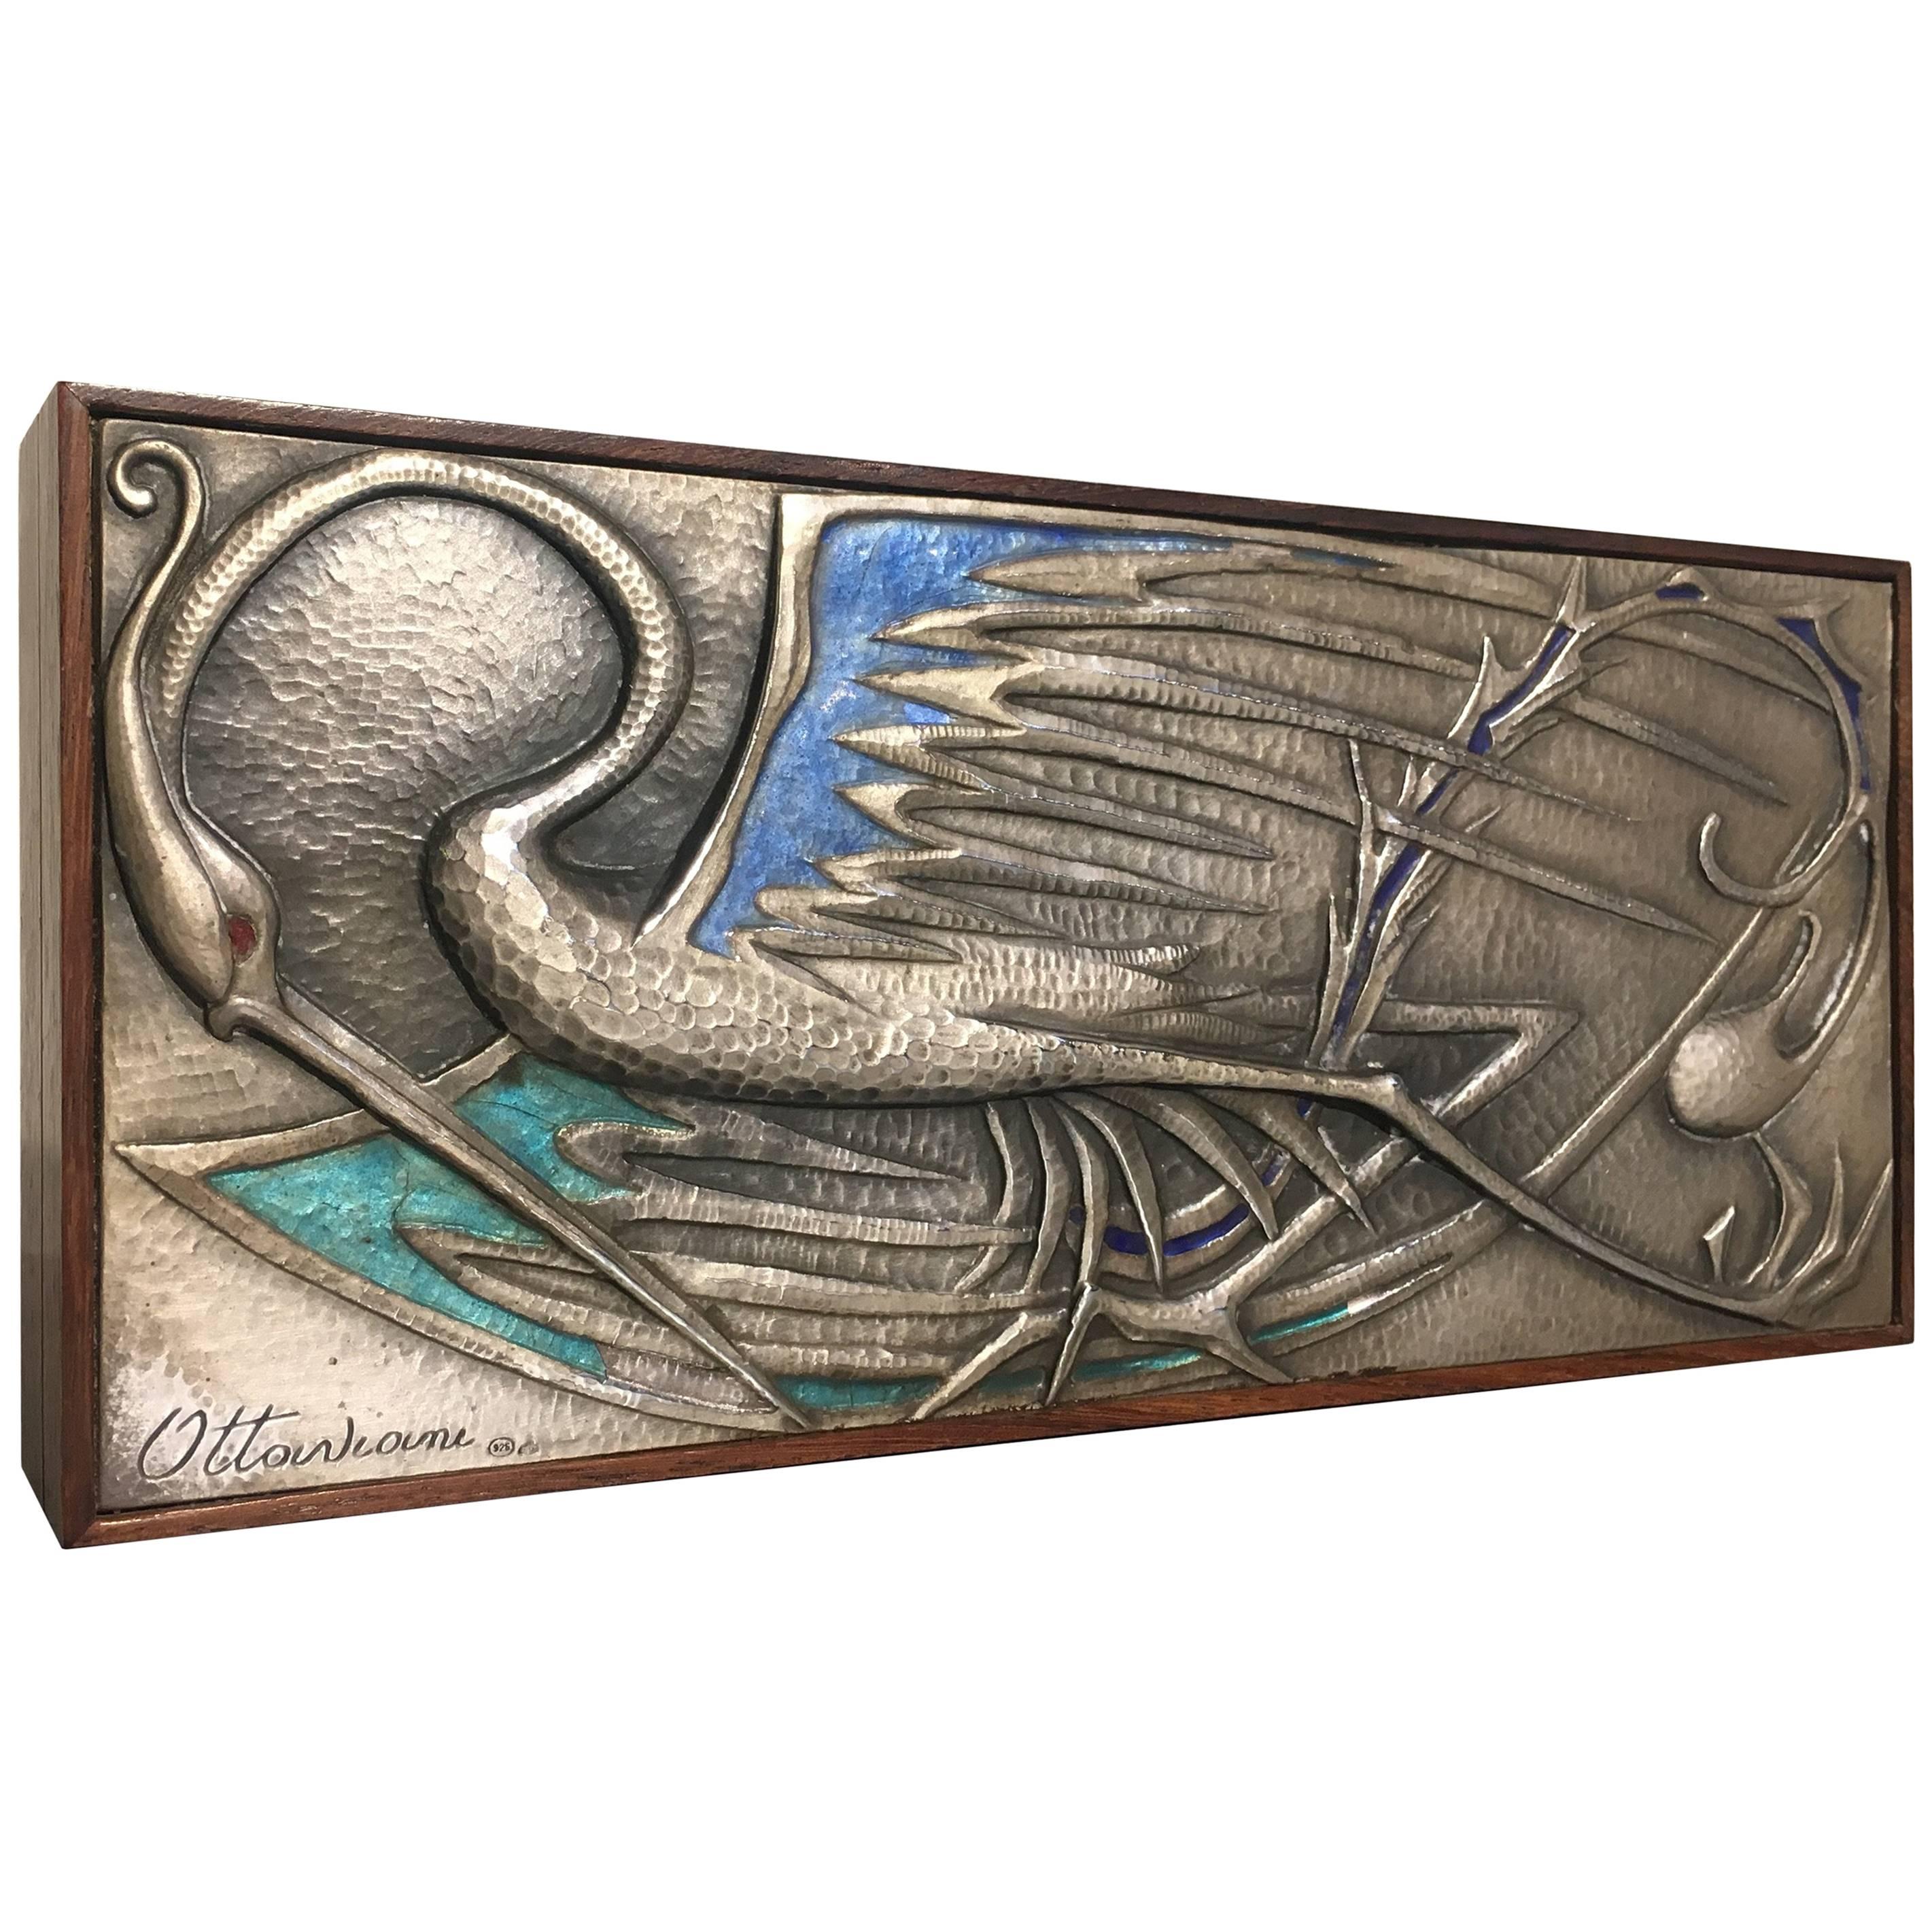 Ottaviani Silver and Enamel Rosewood Box with Bird Design, 1950s